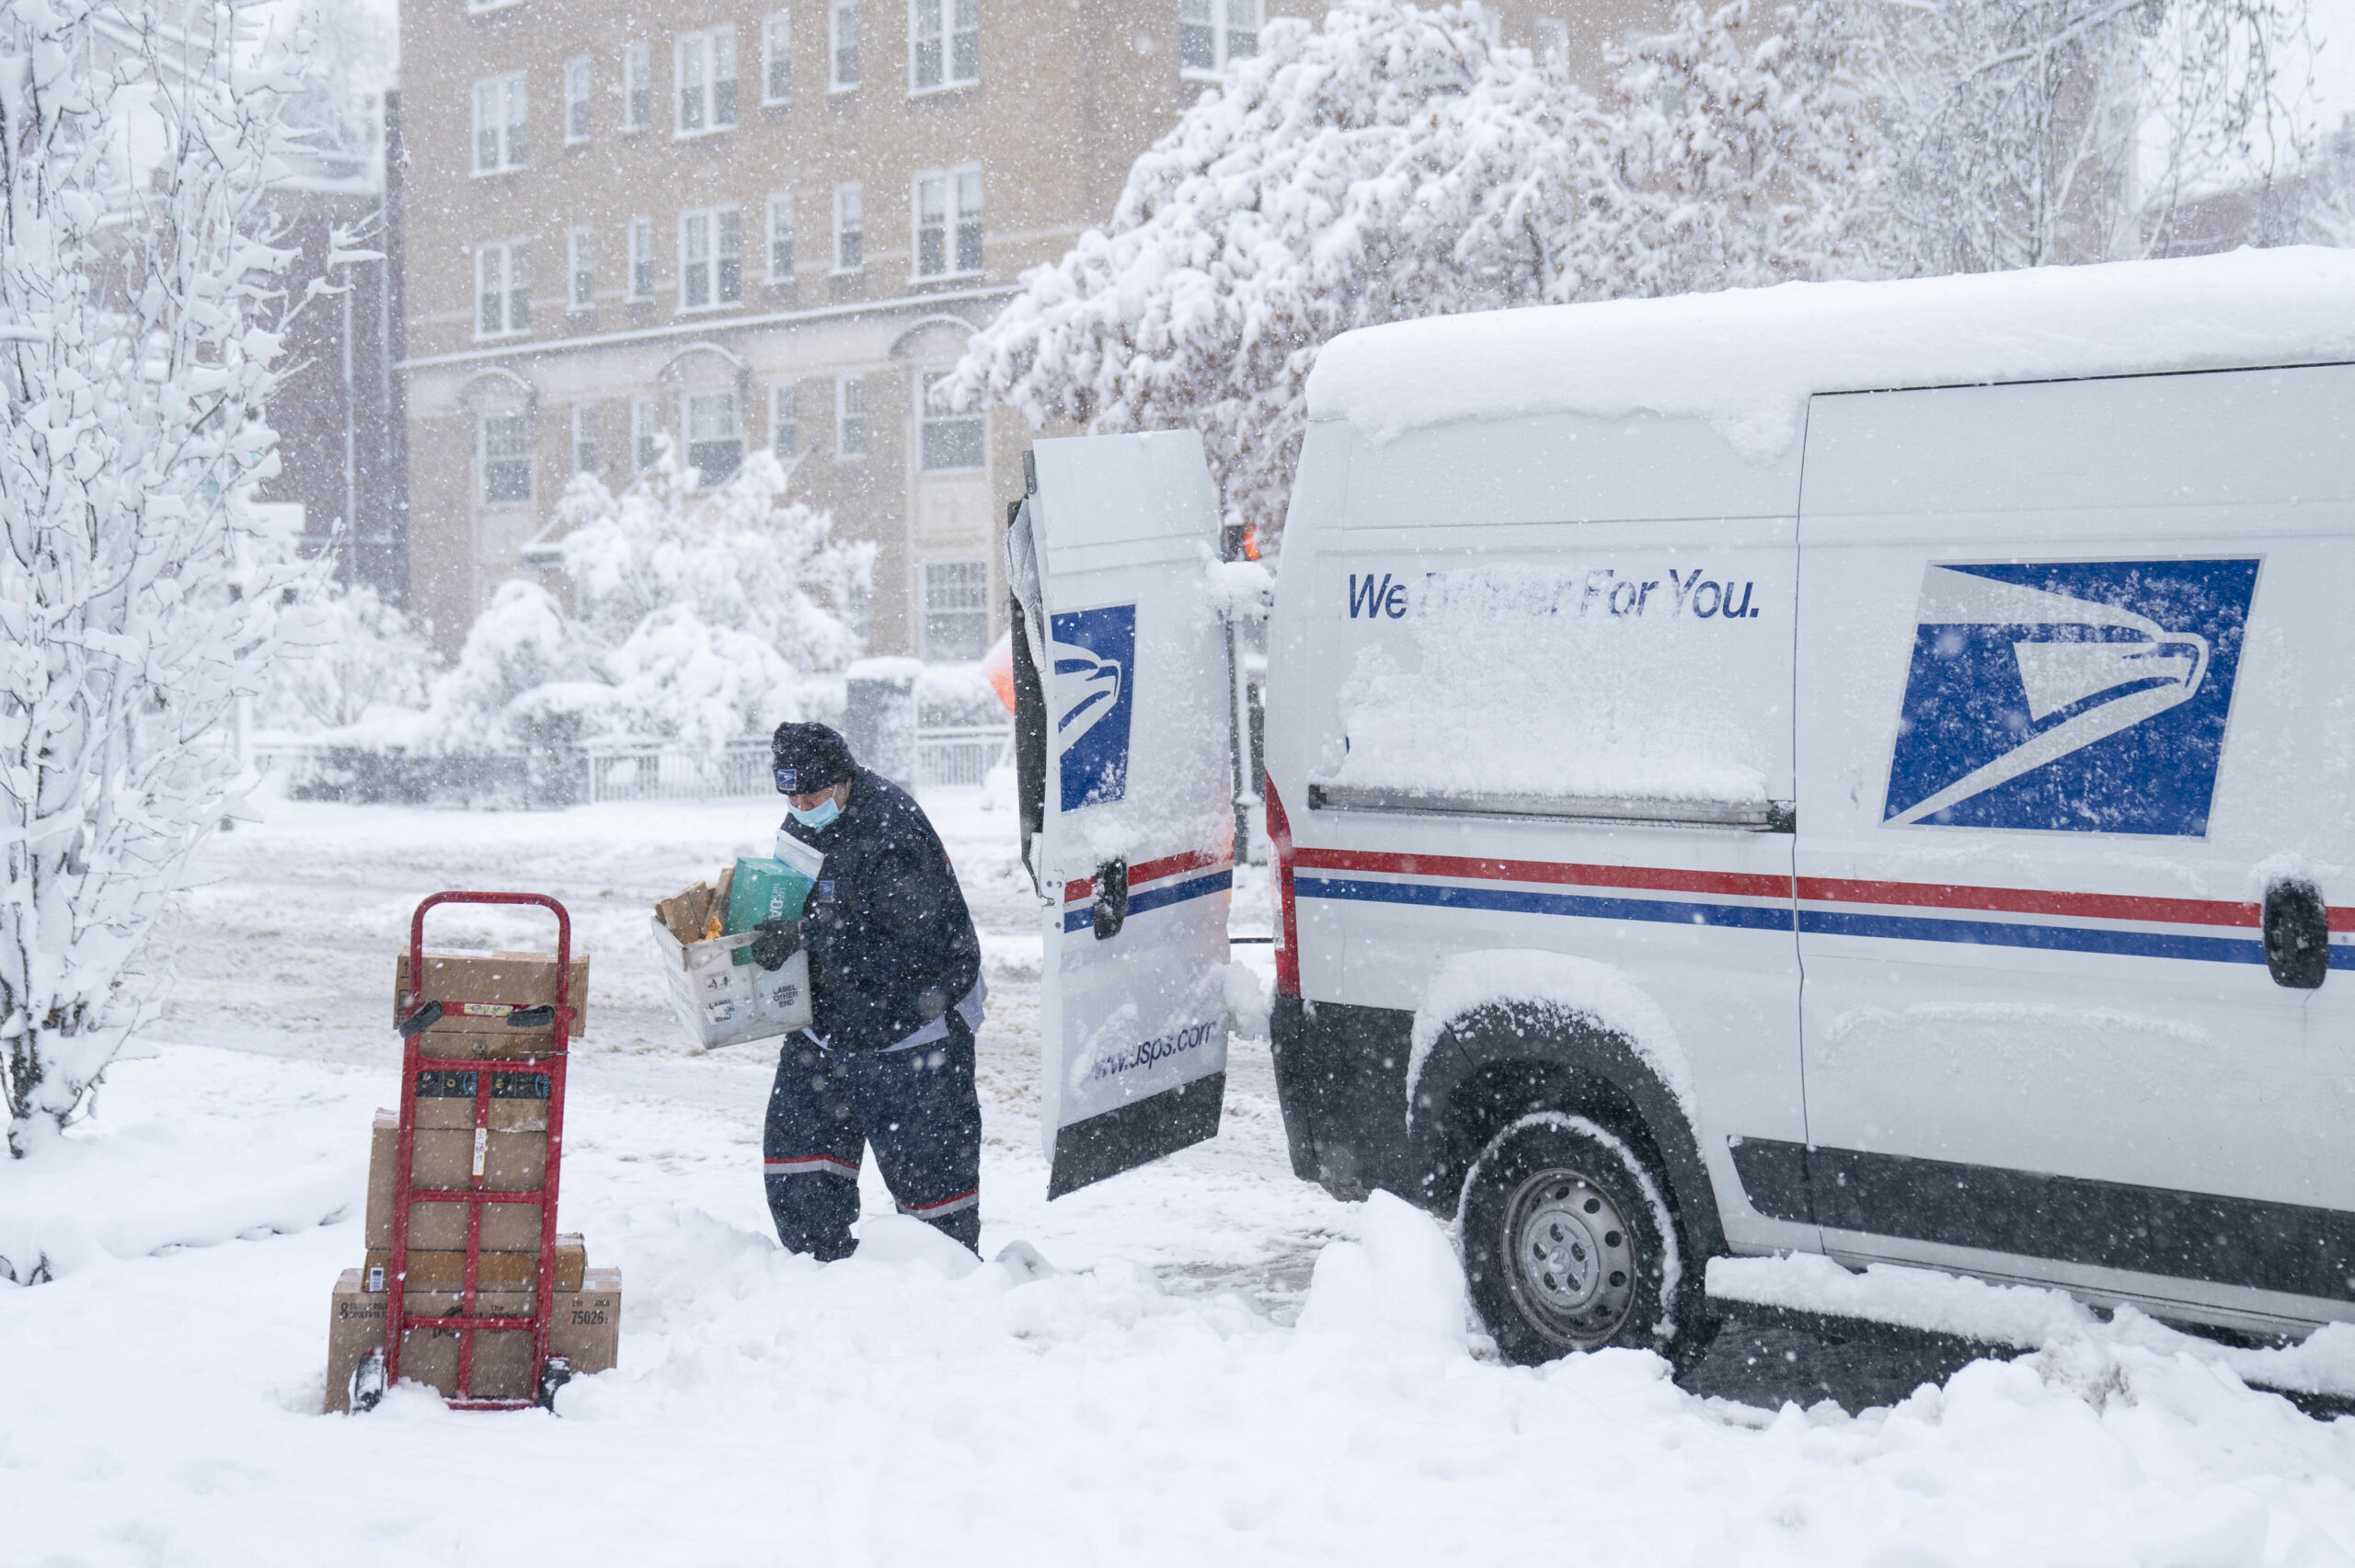 A postal worker carries a package out of his truck in the snow